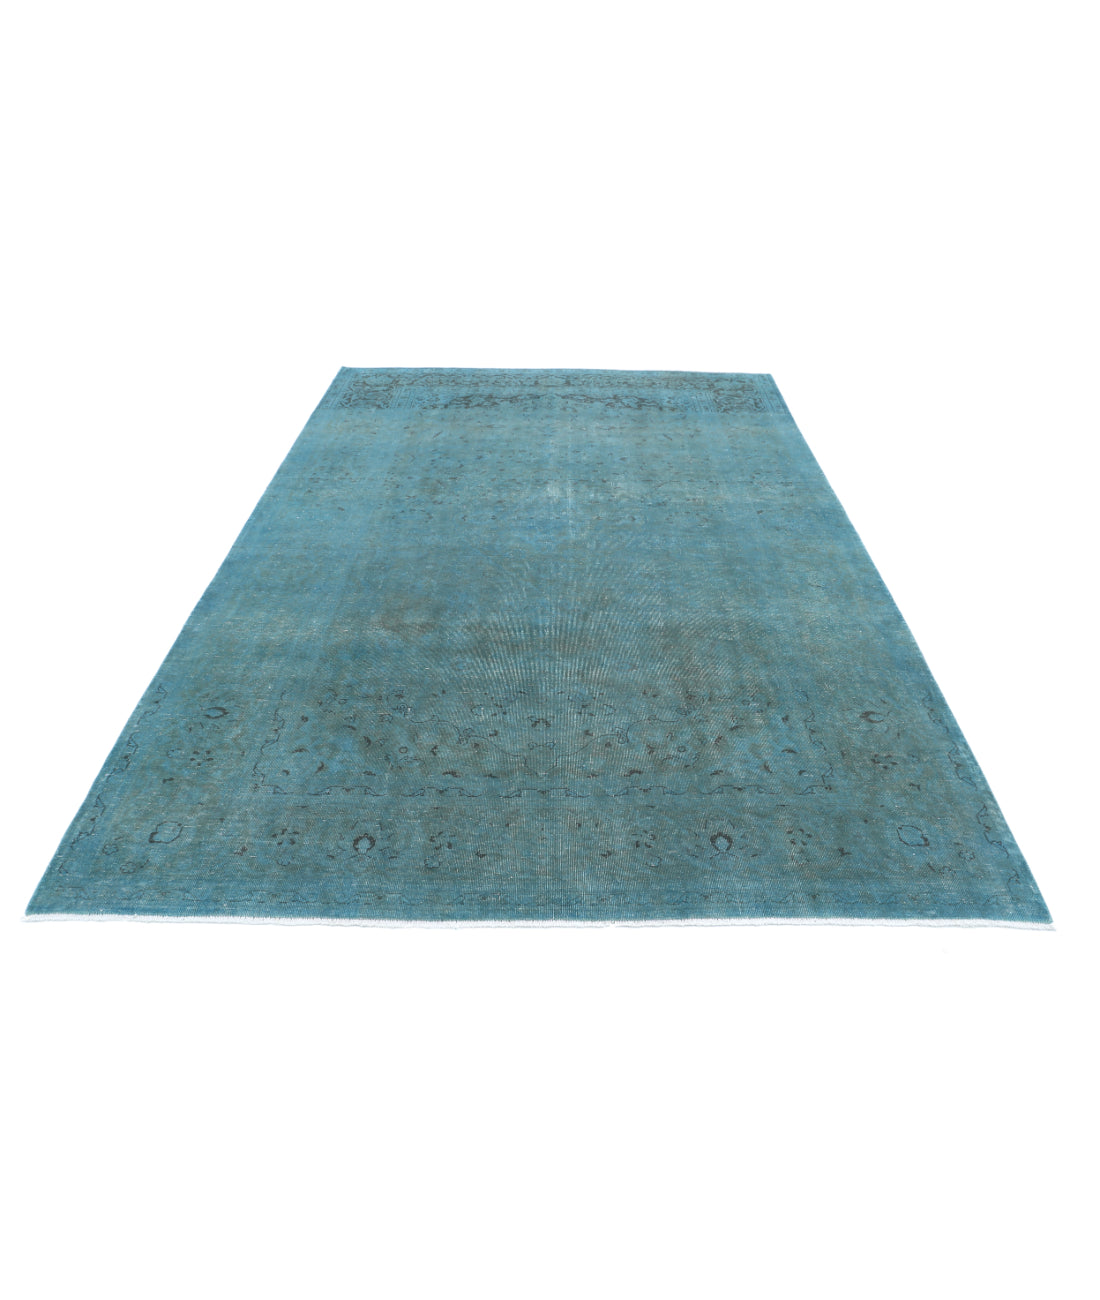 Hand Knotted Transitional Overdye Kashan Wool Rug - 6'8'' x 10'0'' 6'8'' x 10'0'' (200 X 300) / Teal / Charcoal